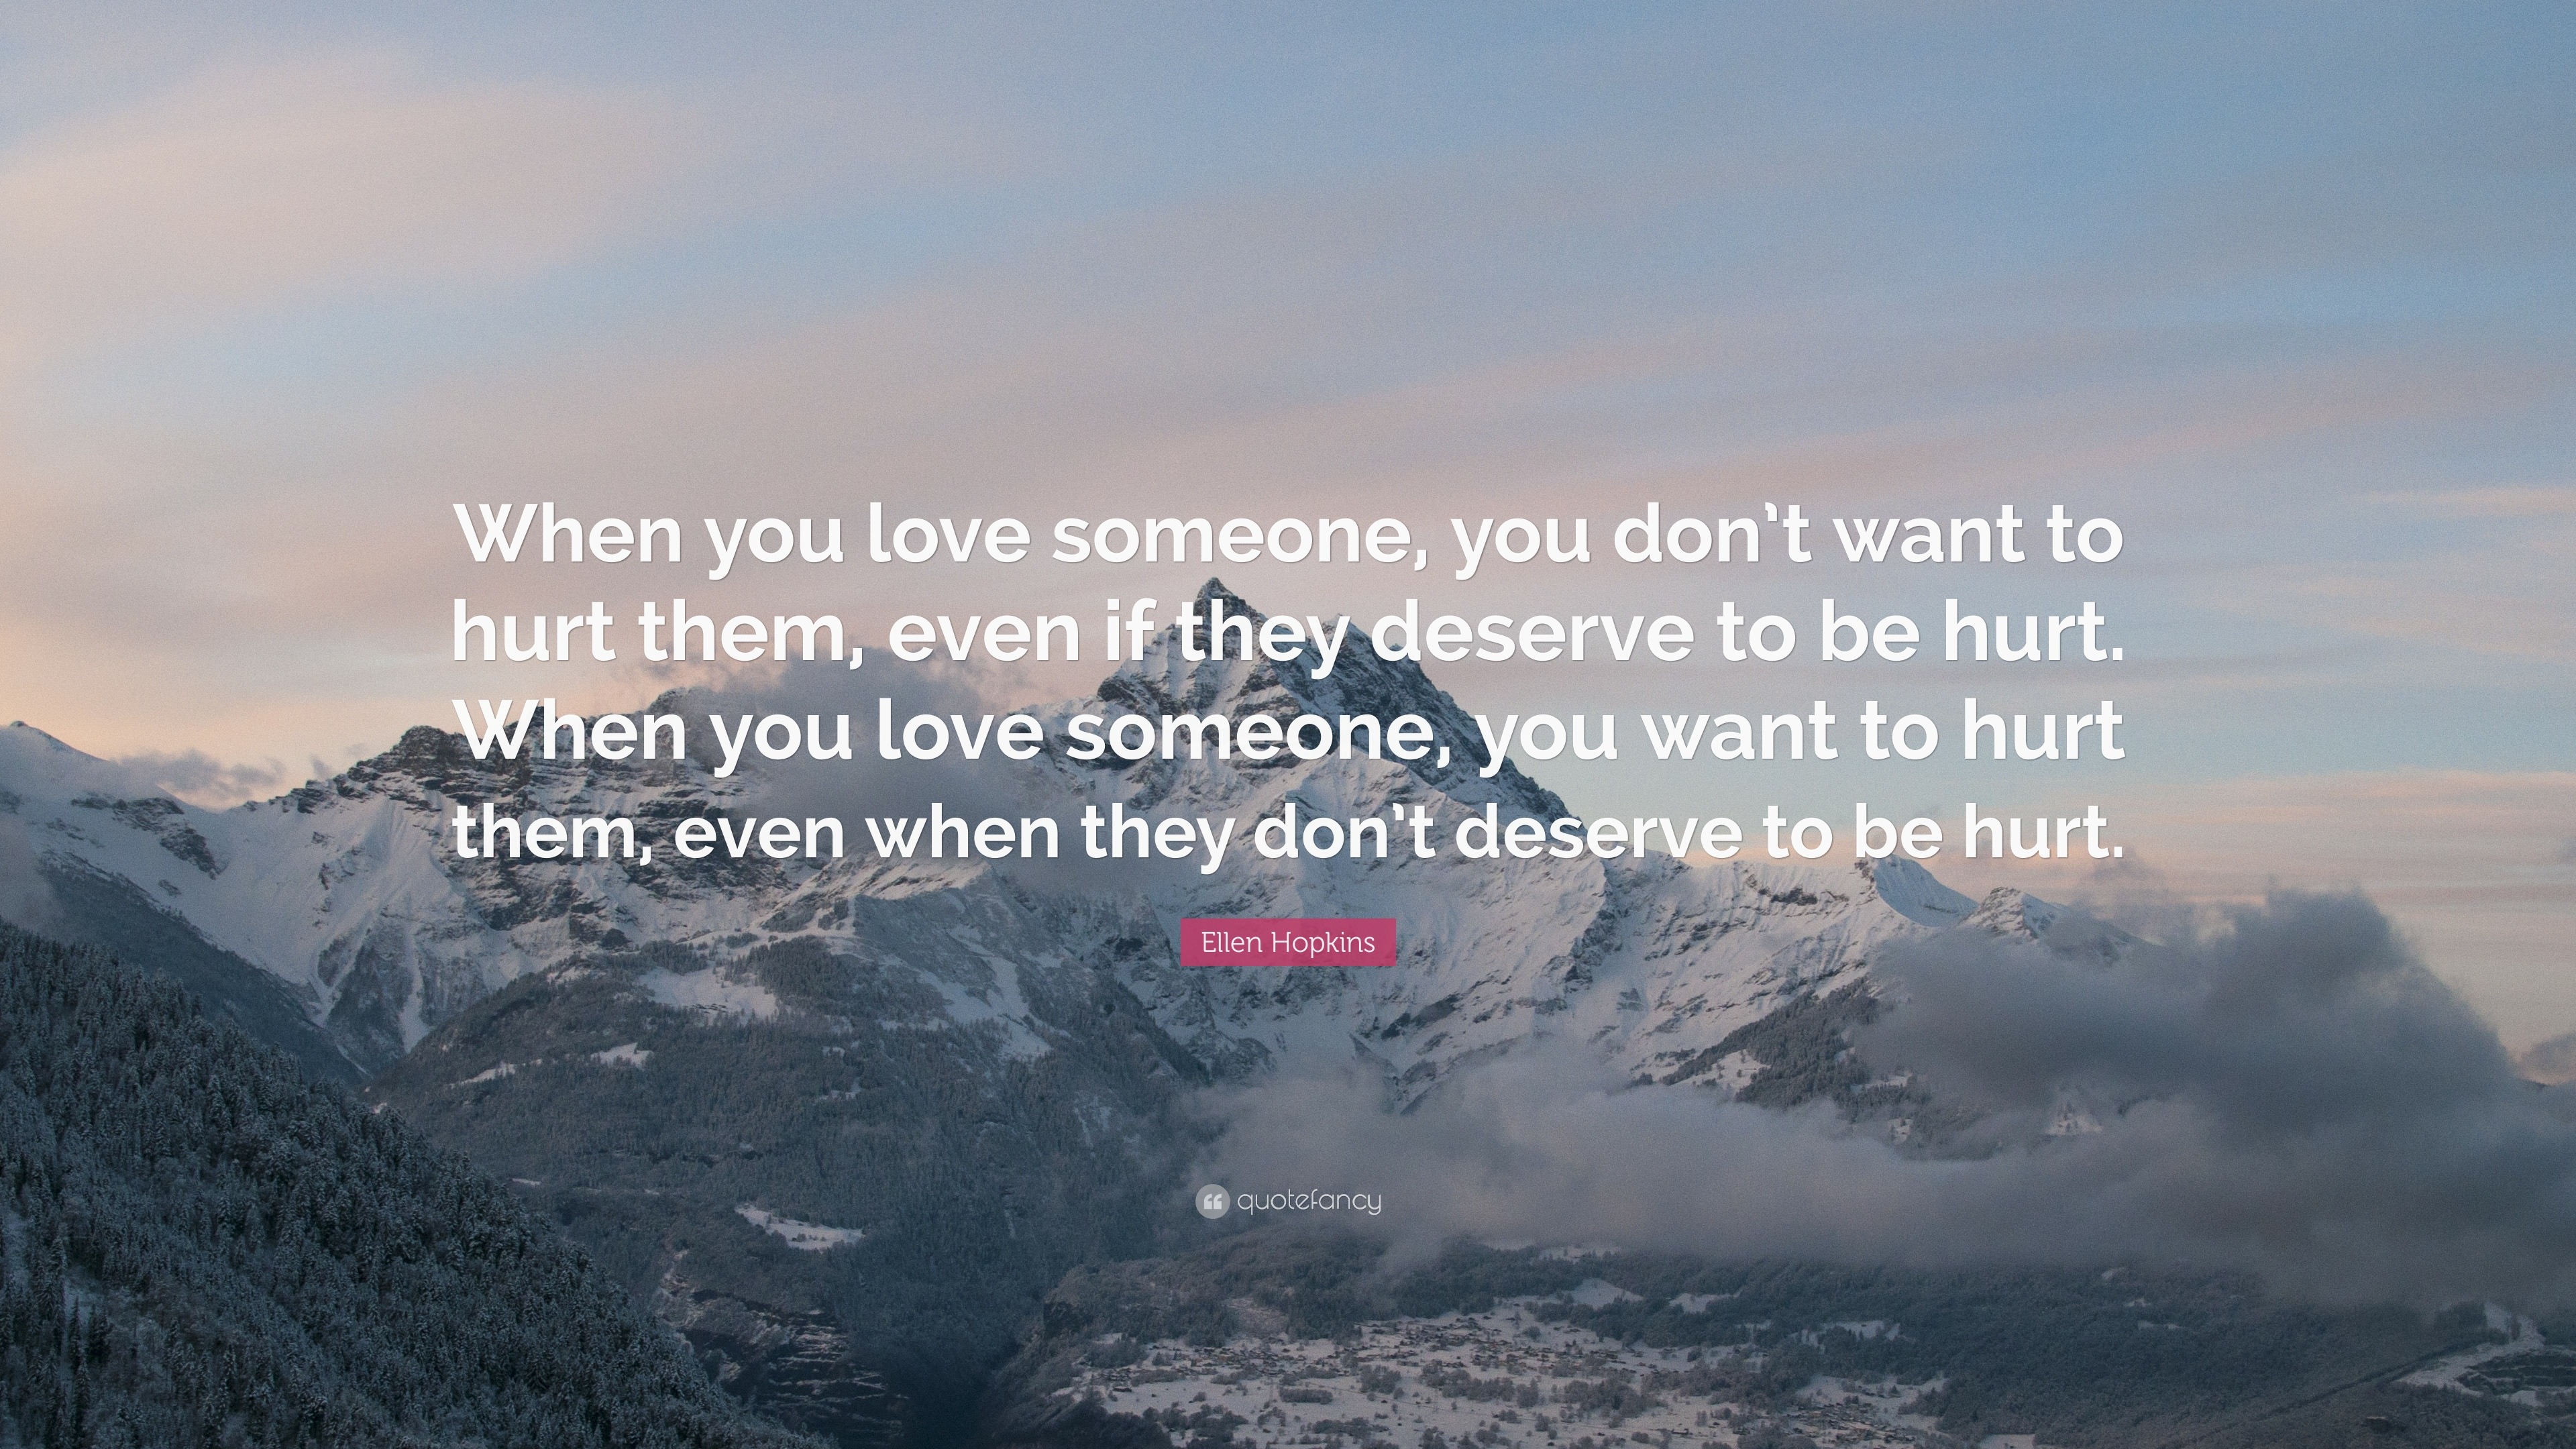 Ellen Hopkins Quote “When you love someone you don t want to